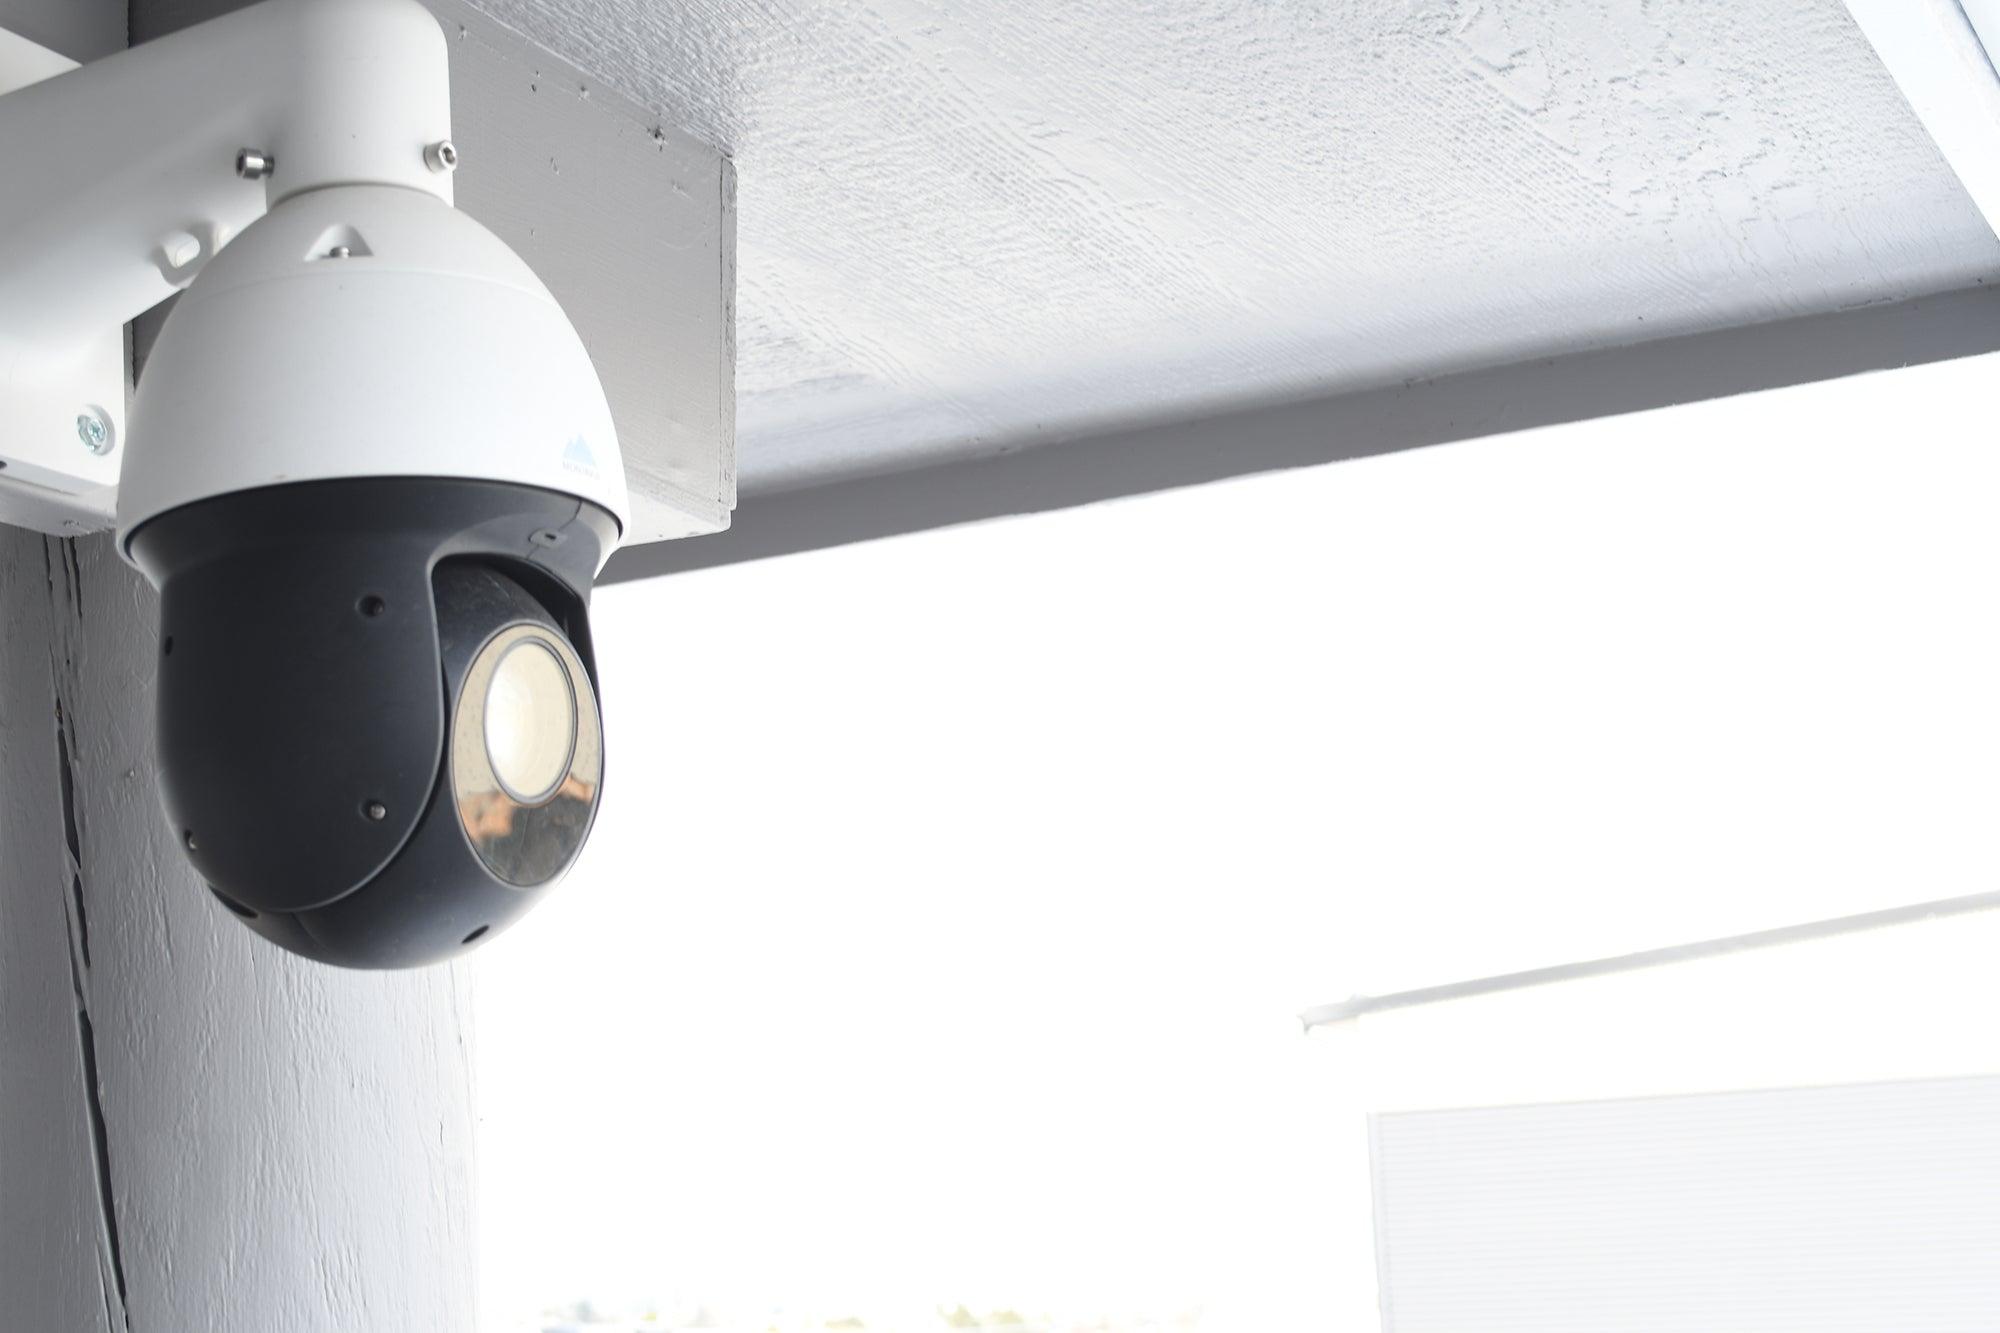 Common Reasons For Video Loss on Security Cameras: How To Fix Them - Montavue